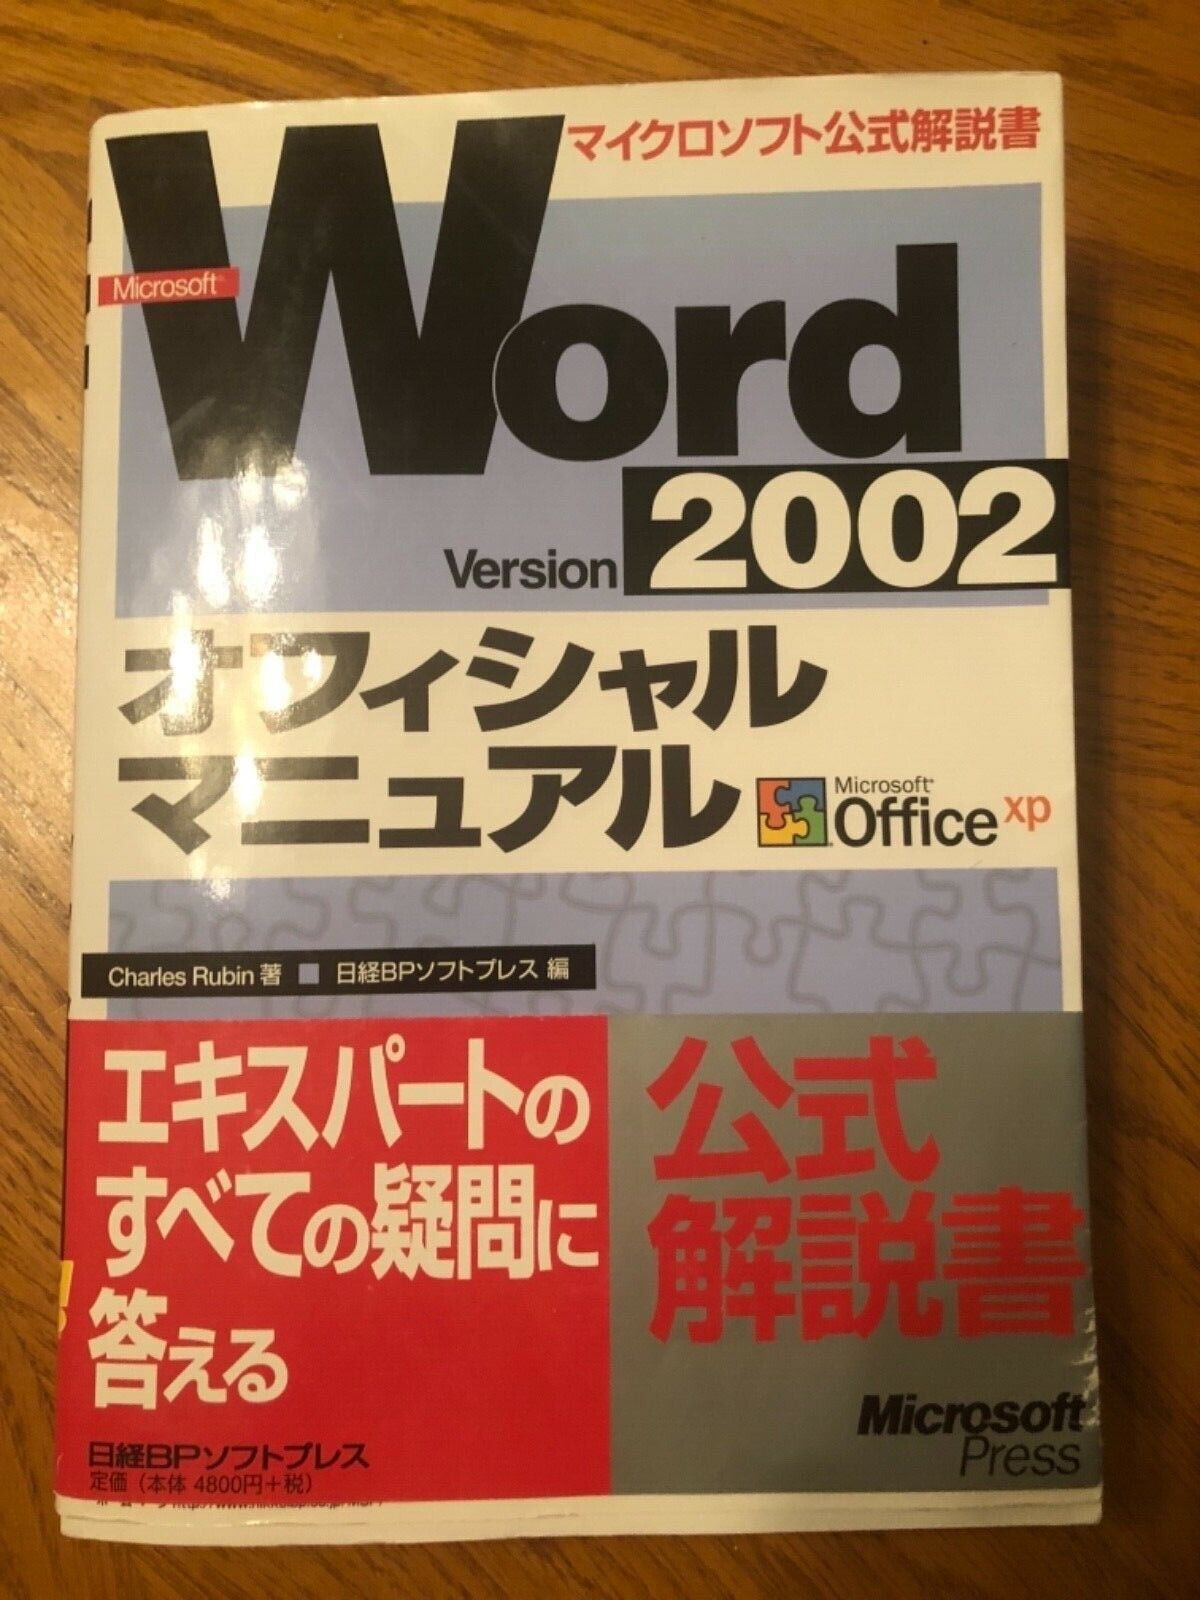 Microsoft Word Version 2002 Training Book, Japanese Or Chinese By Charles Rubin